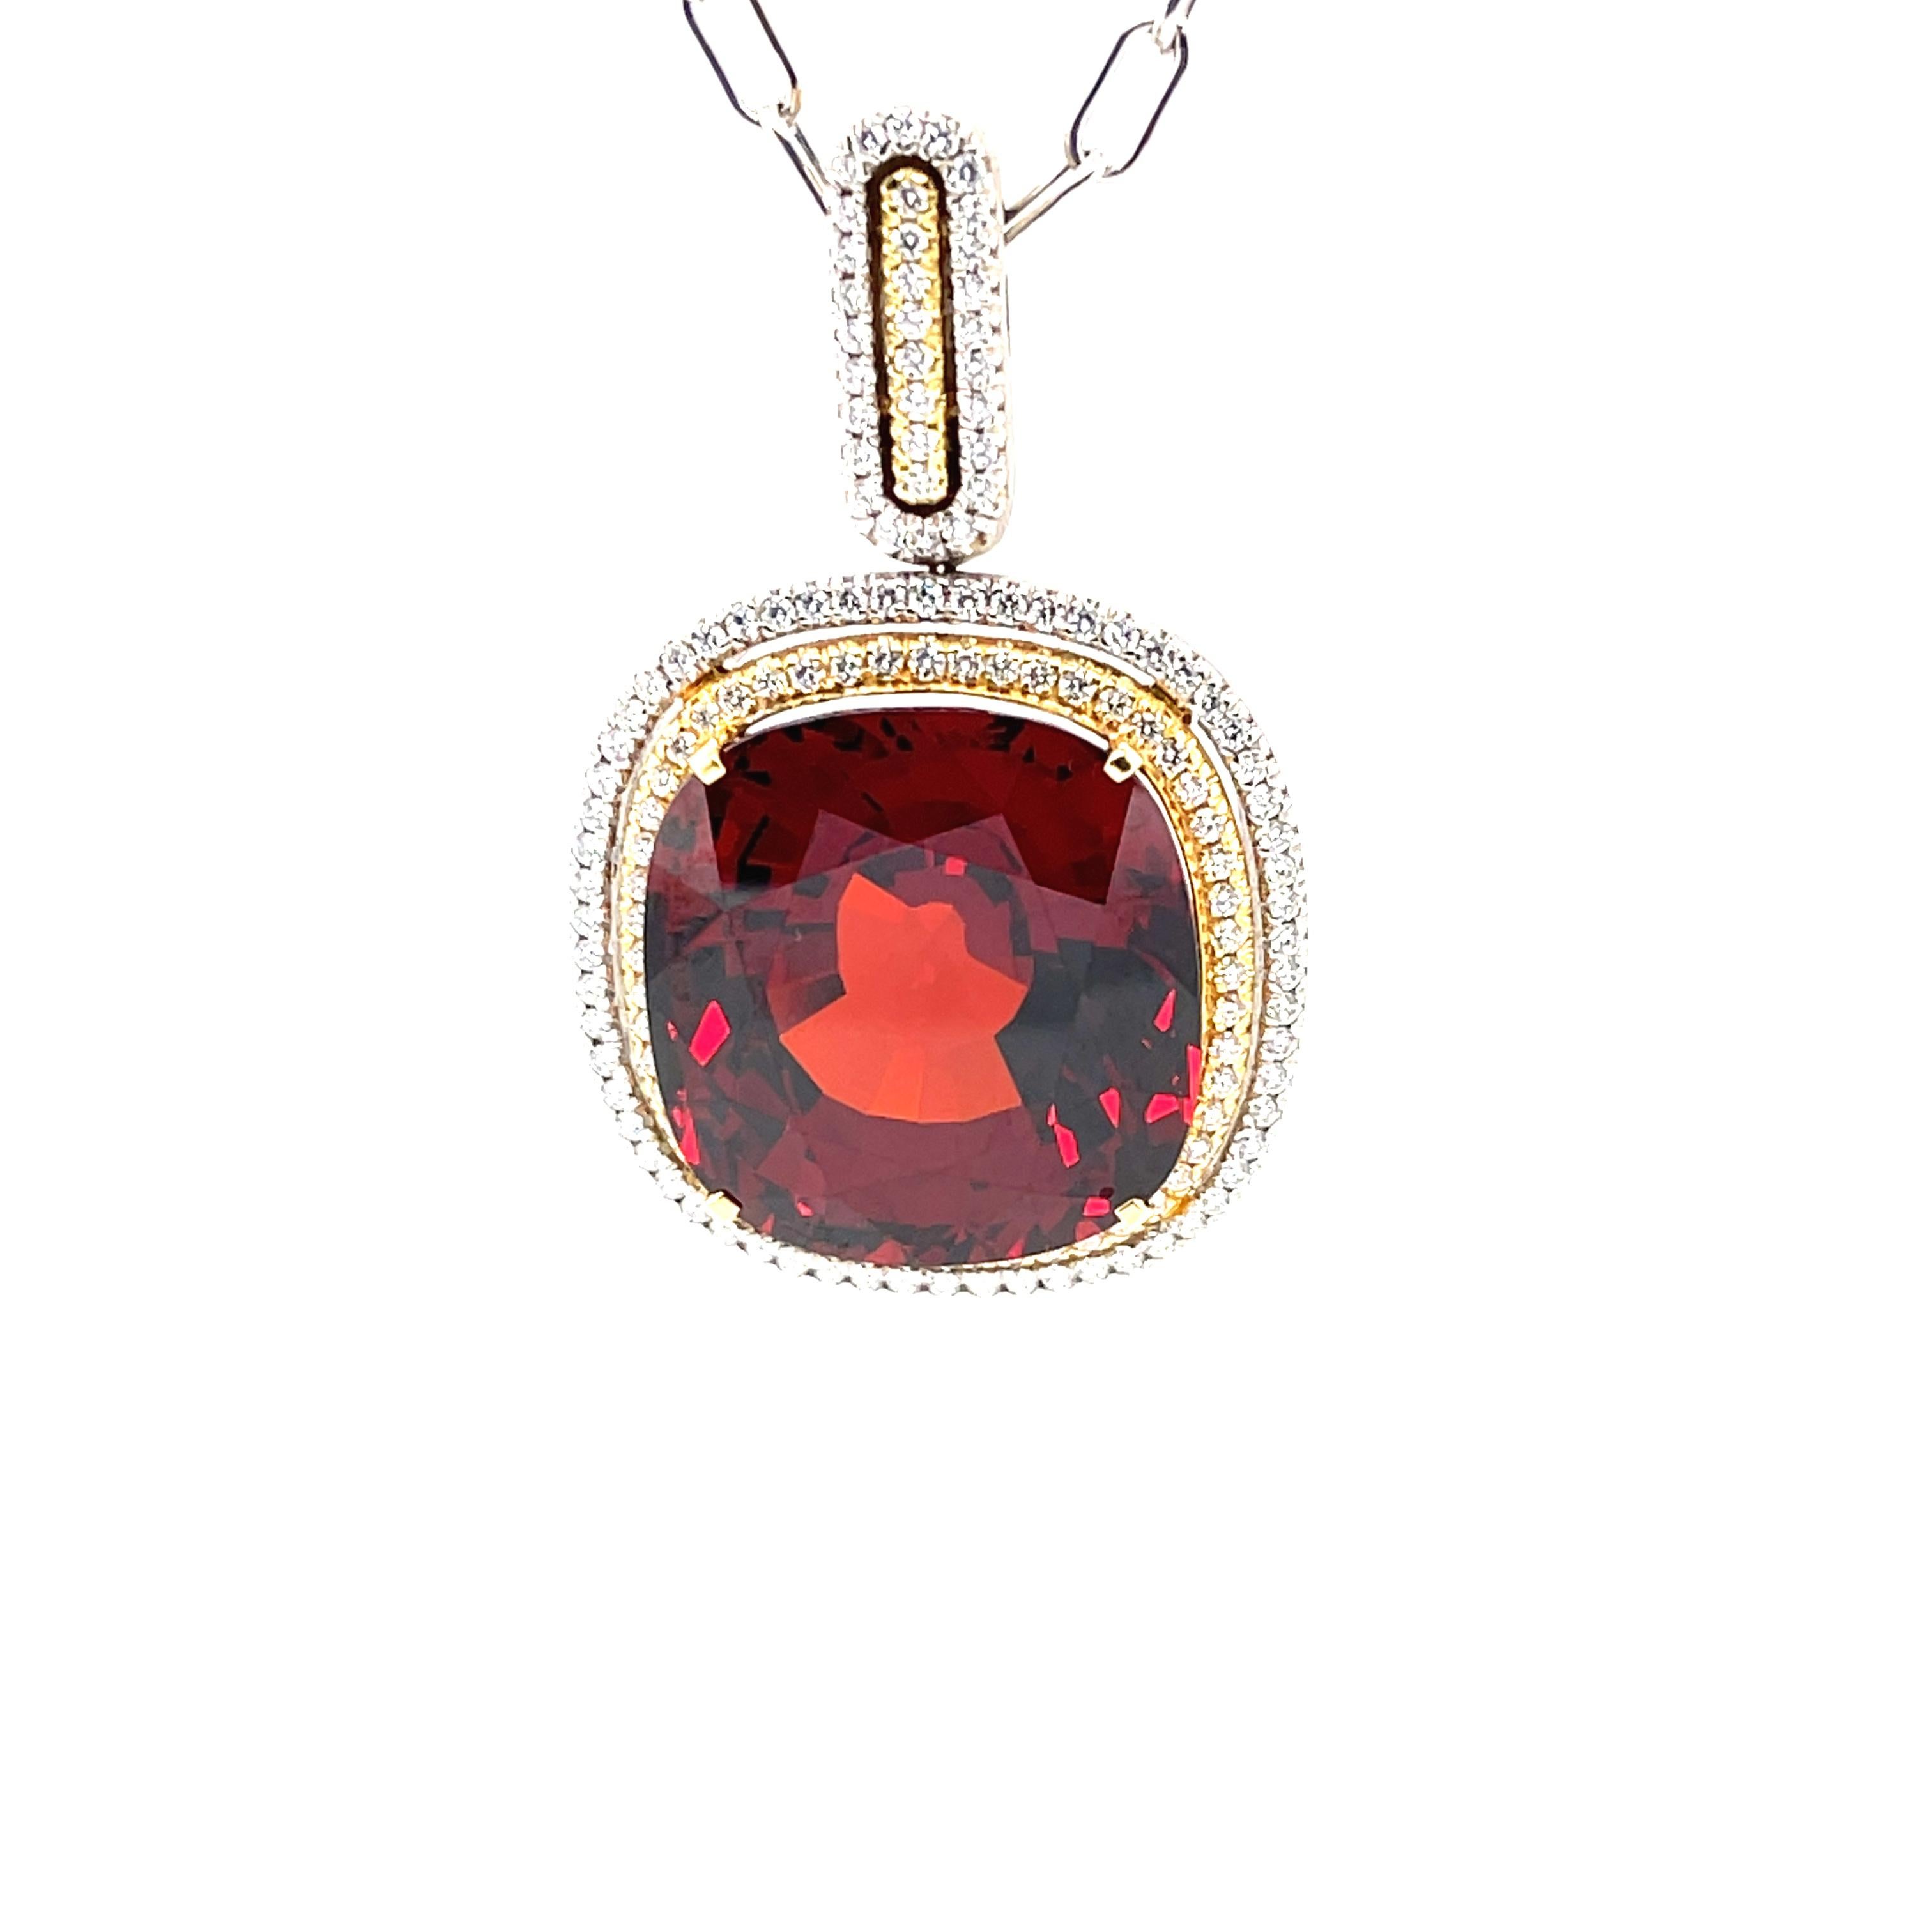 Women's or Men's 50.93 Carat Hessonite Garnet and Diamond Halo Necklace in Yellow and White Gold